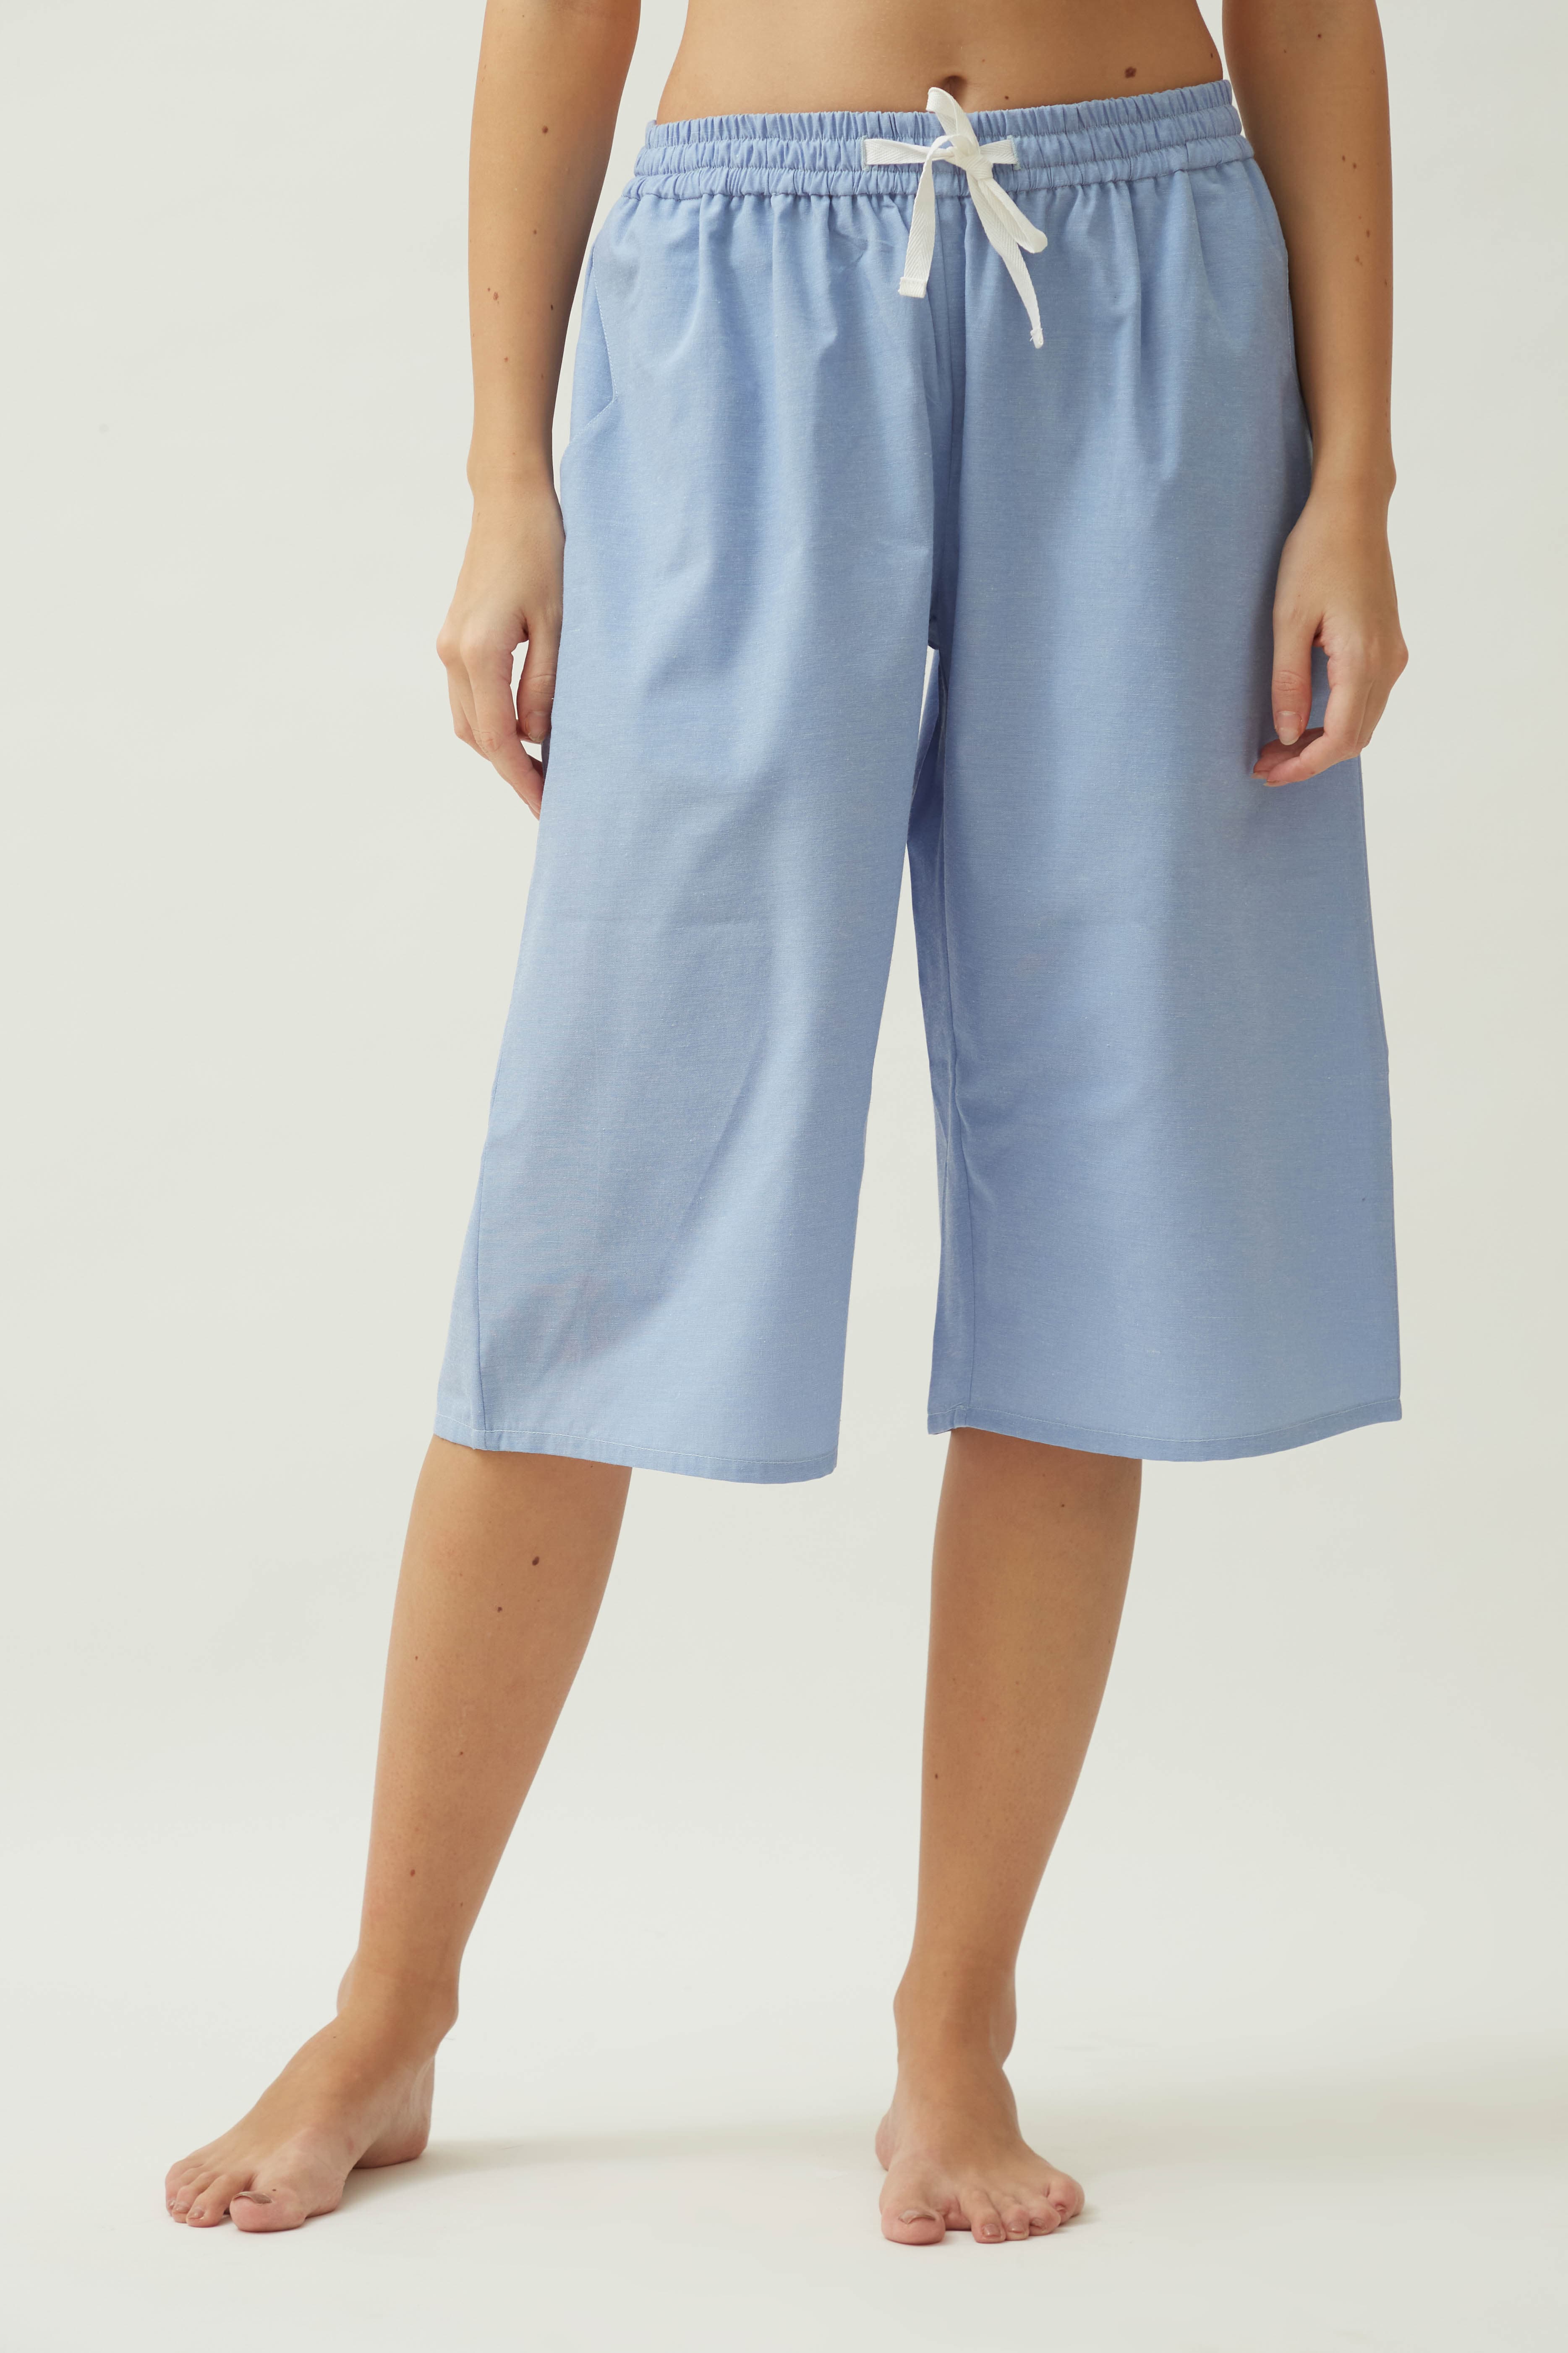 Saltpetre womens casual knee length culotte shorts with side pockets, in citadel blue in 100% organic cotton fabric.